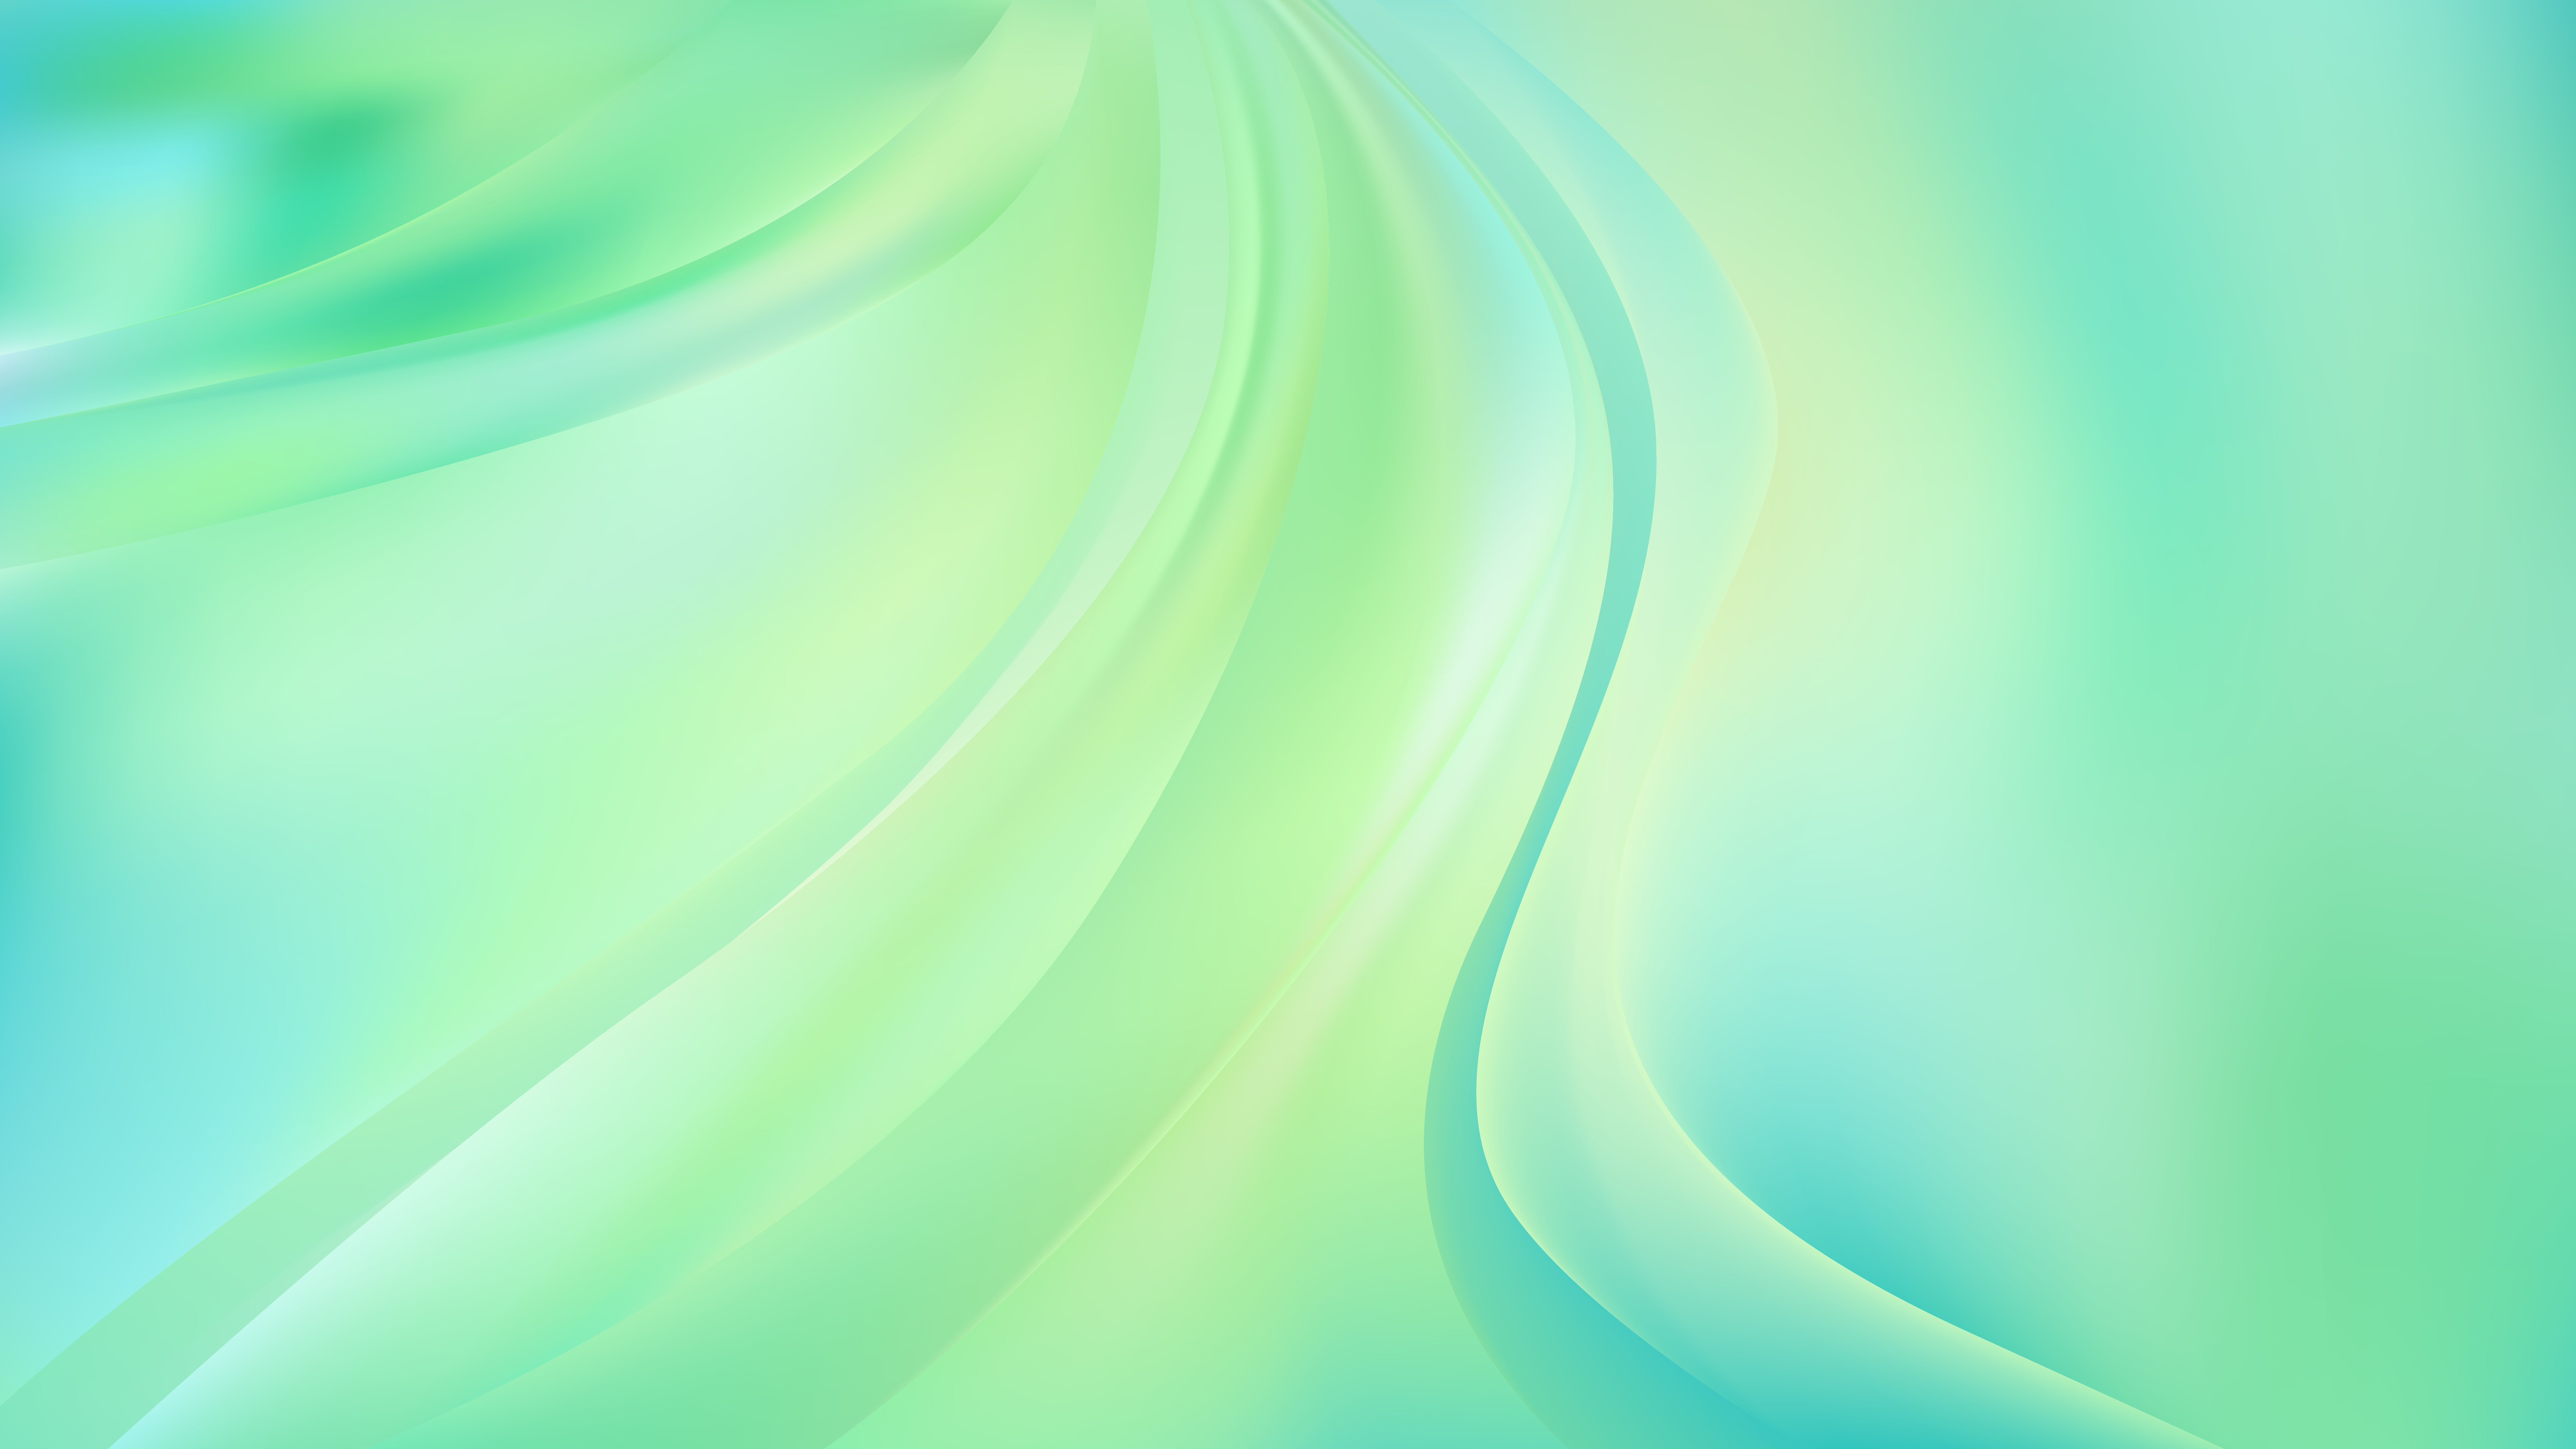 Free download Abstract Glowing Mint Green Wave Background [8000x4500